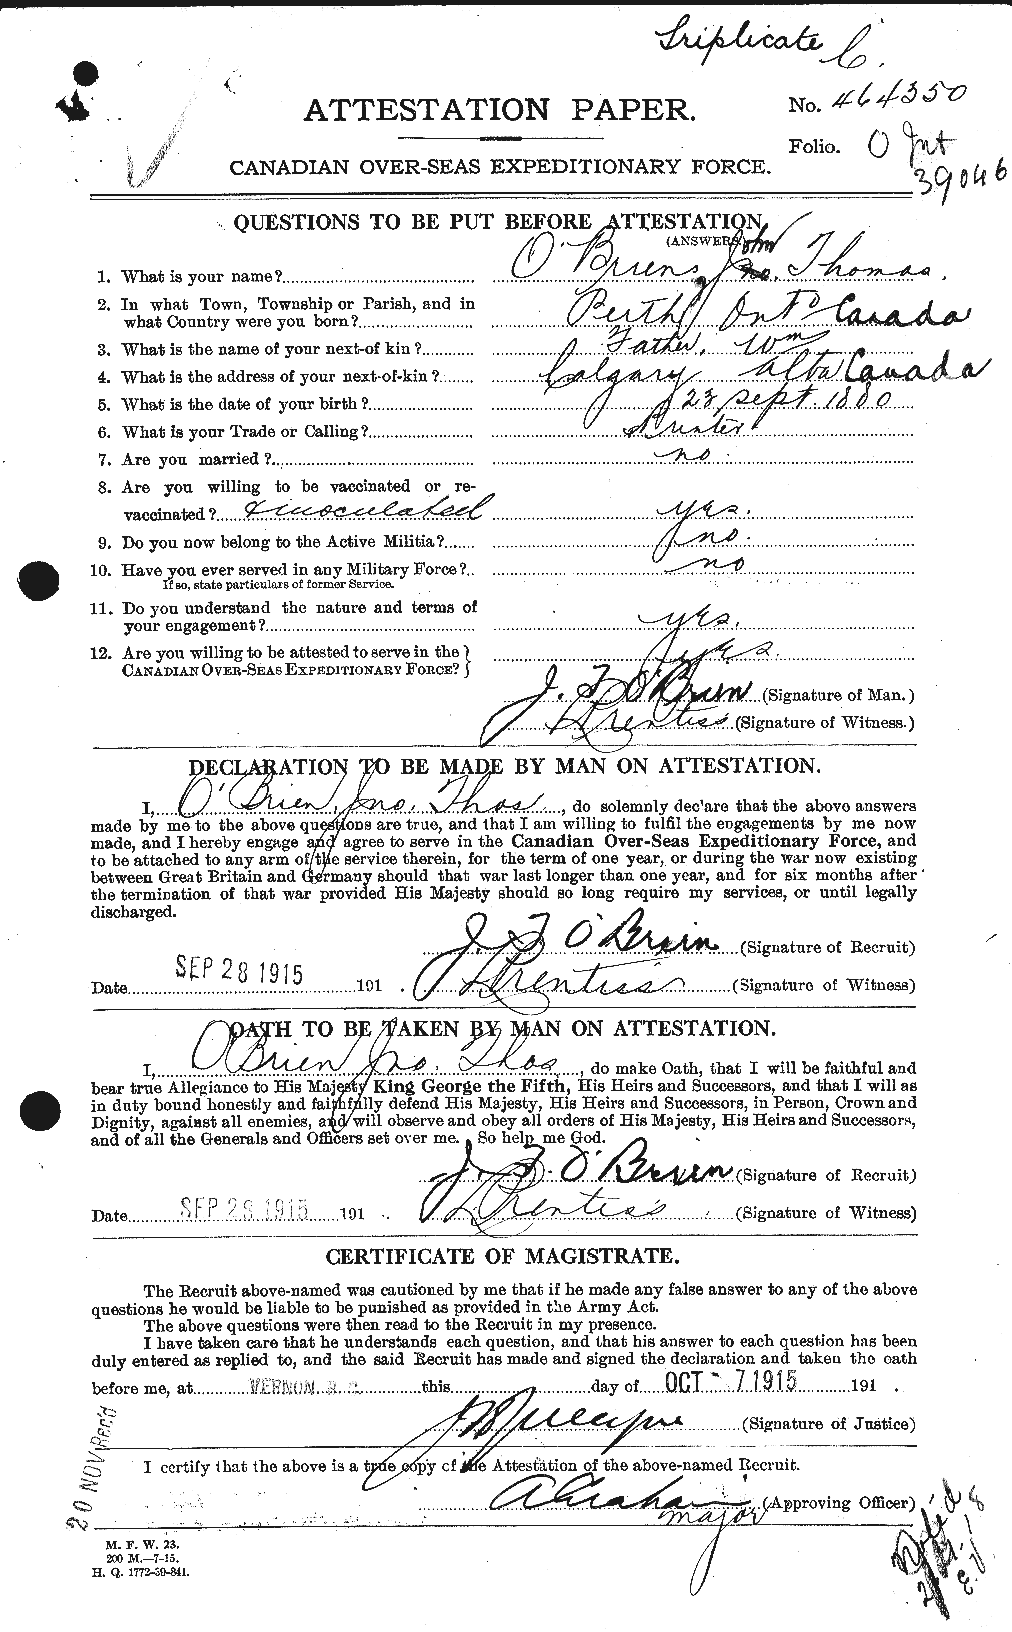 Personnel Records of the First World War - CEF 554818a